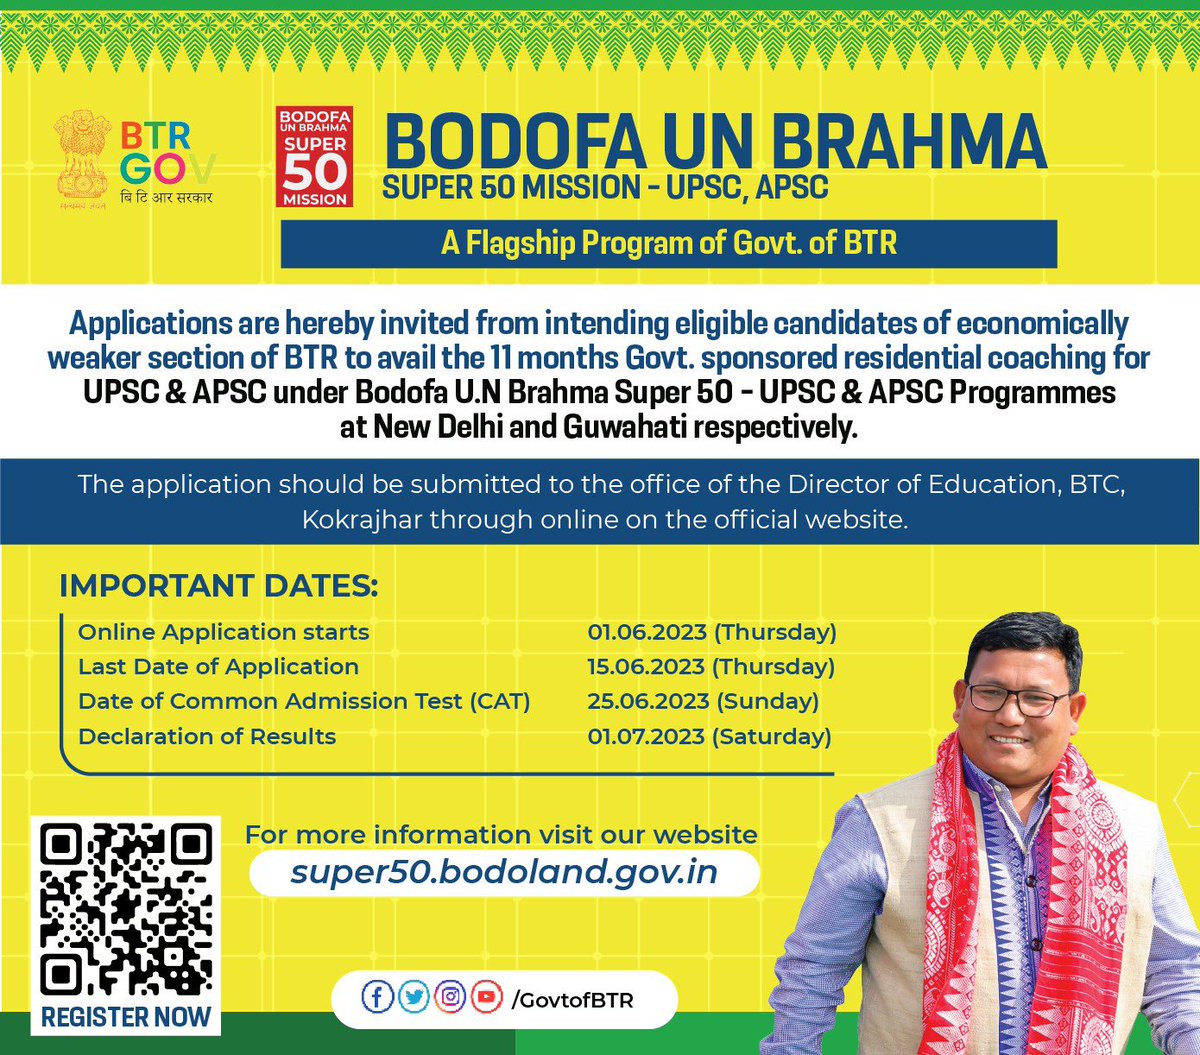 𝐈𝐦𝐩𝐨𝐫𝐭𝐚𝐧𝐭 𝐔𝐩𝐝𝐚𝐭𝐞:

Aspirants of UPSC & APSC from the economically weaker families of BTR may now apply for our flagship mission, the Bodofa UN Brahma Super 50 Mission (Civil Services).

For further information, please visit our website: super50.bodoland.gov.in